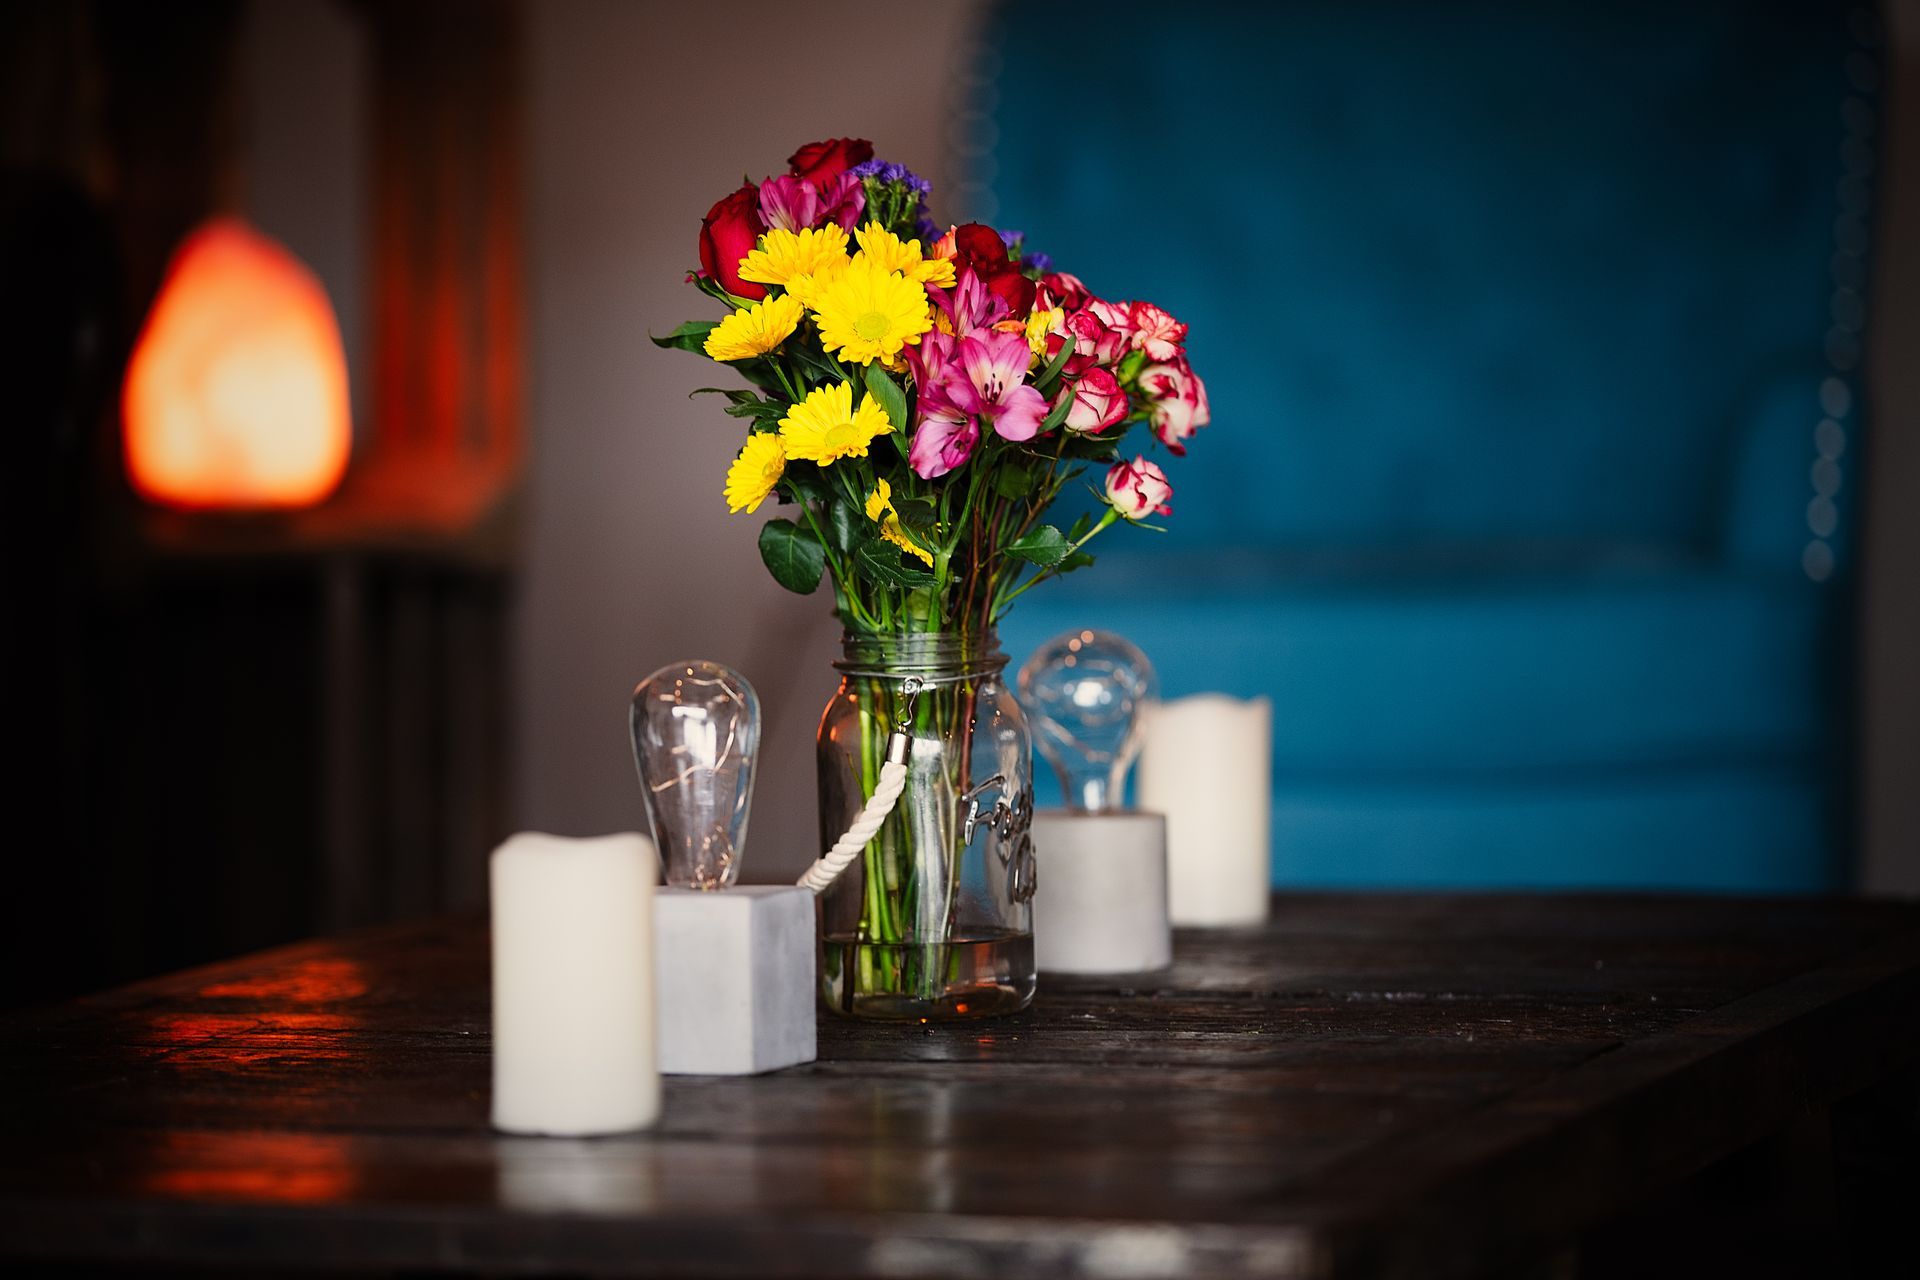 A table with a vase of flowers and candles on it.